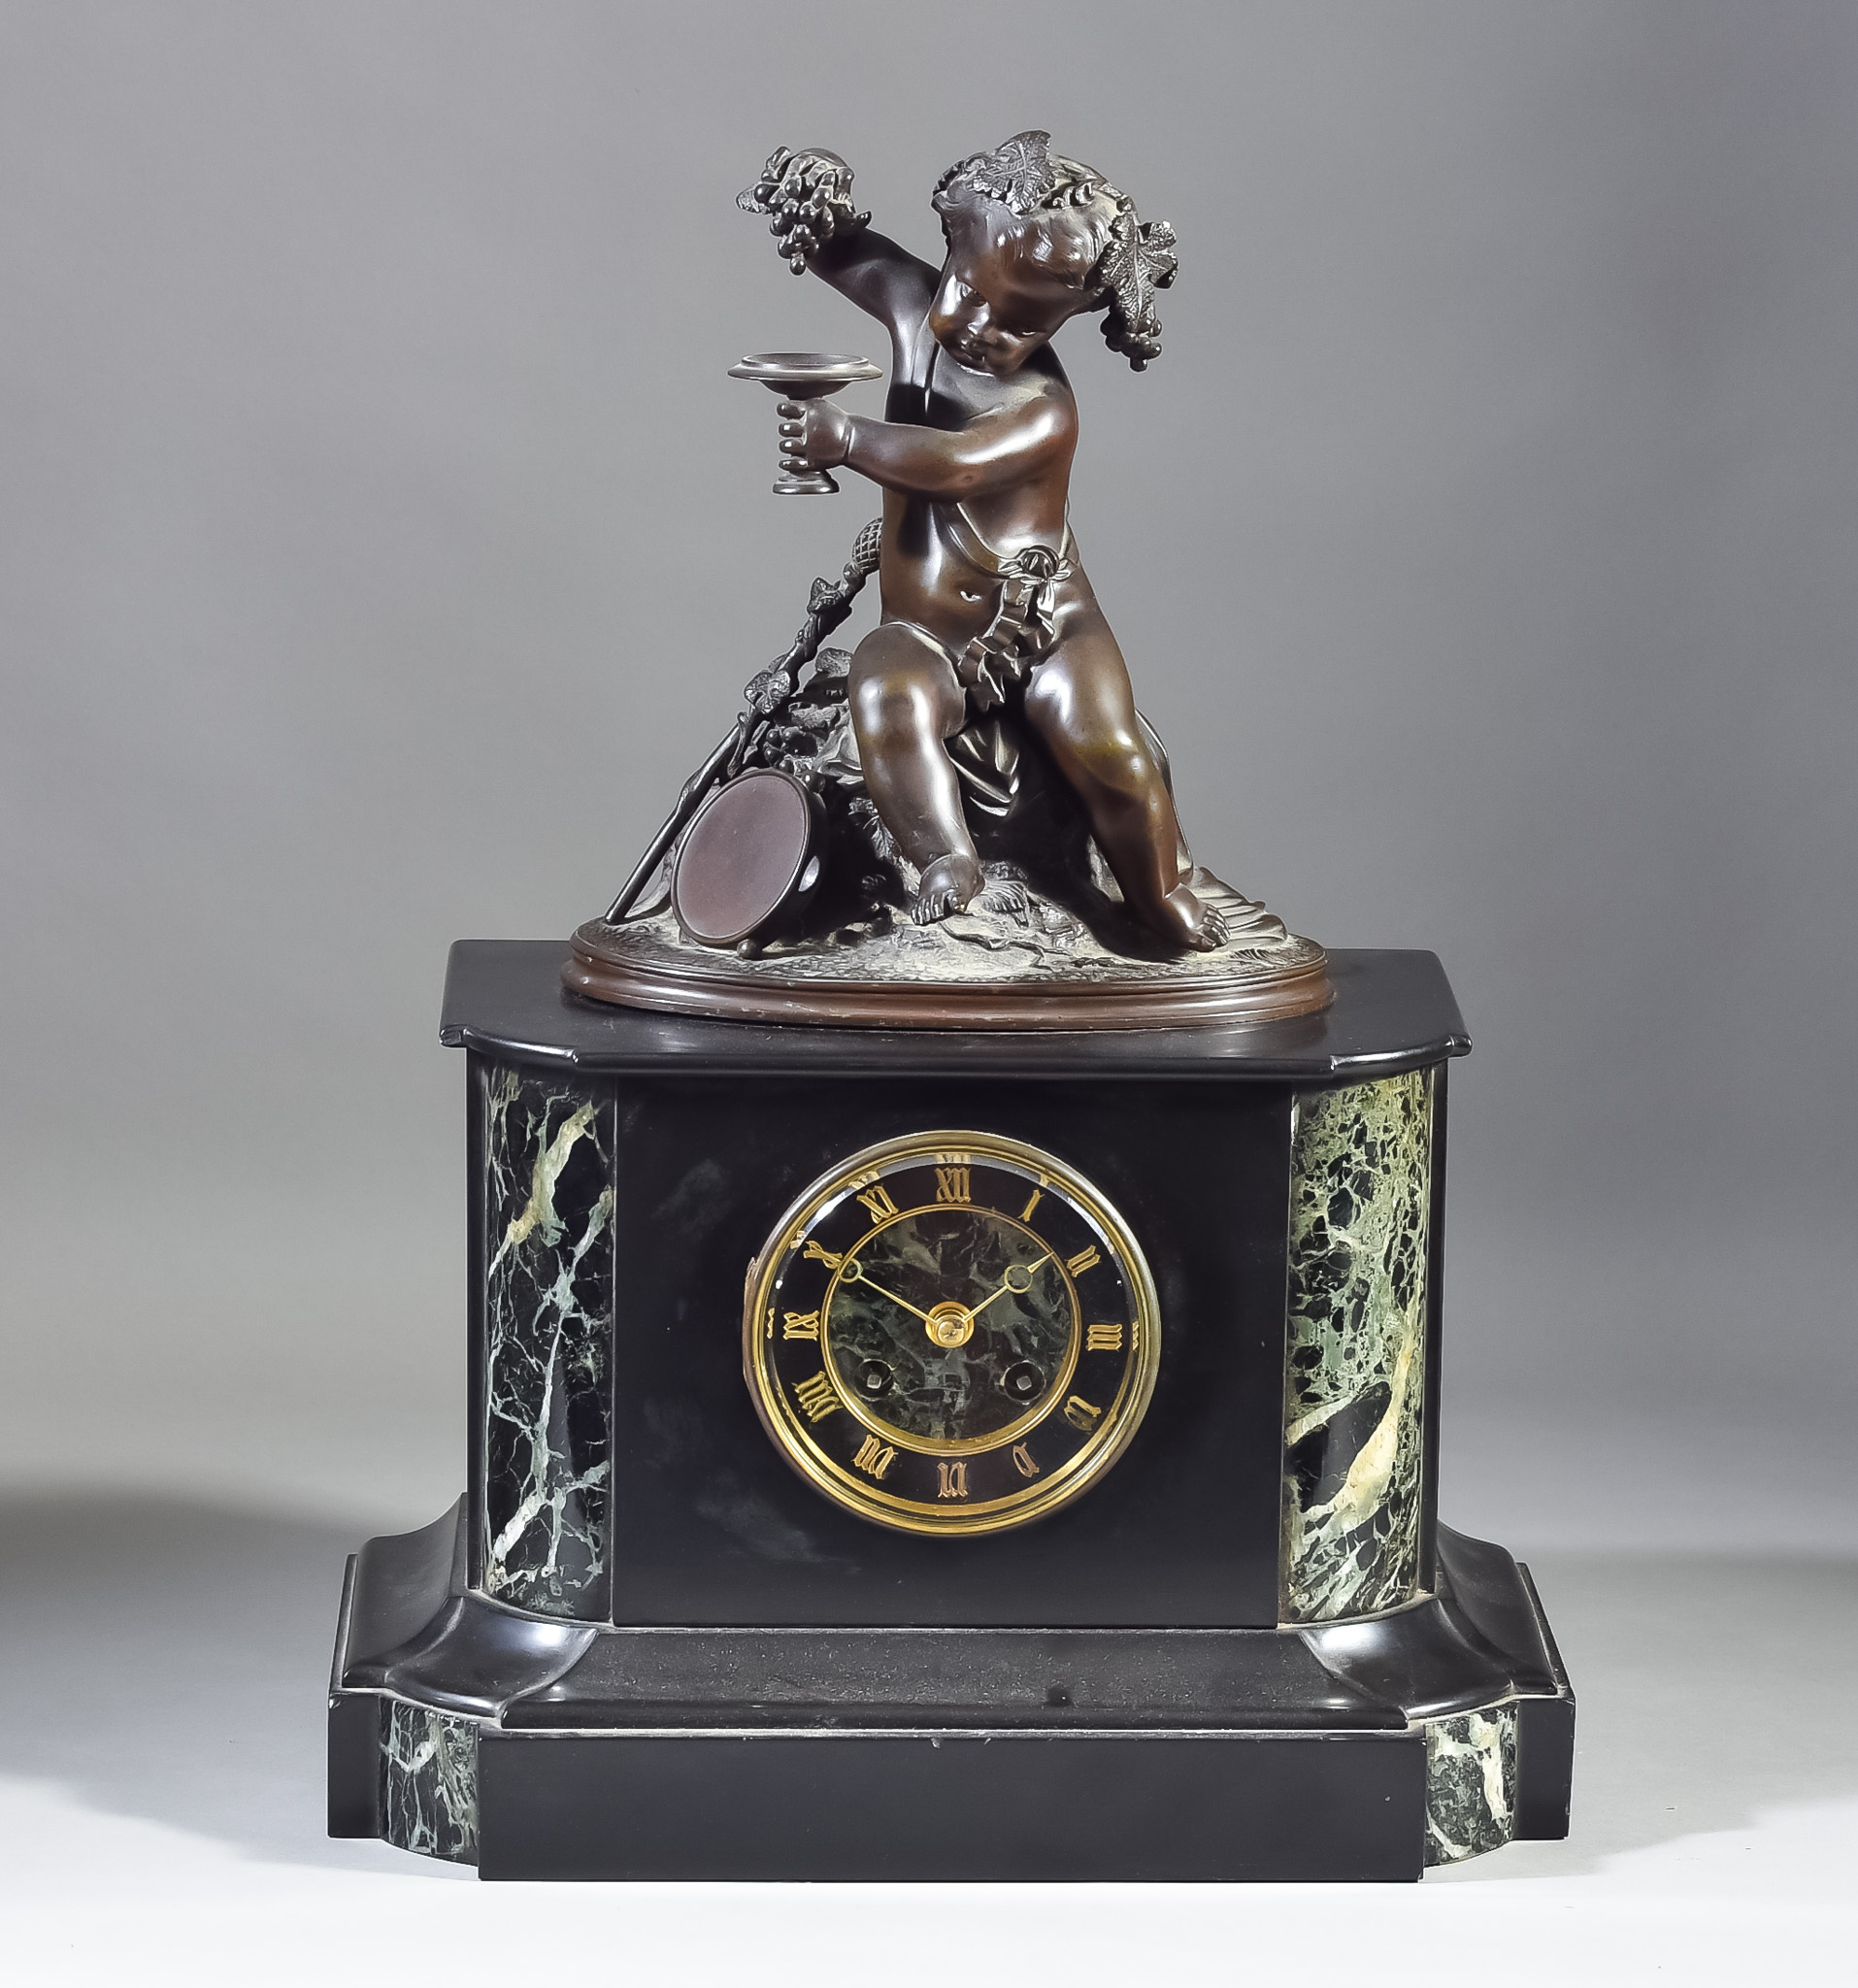 A 19th Century French Black, Green Veined Marble and Bronze Mantel Clock, by CR, No, 147, the 3.